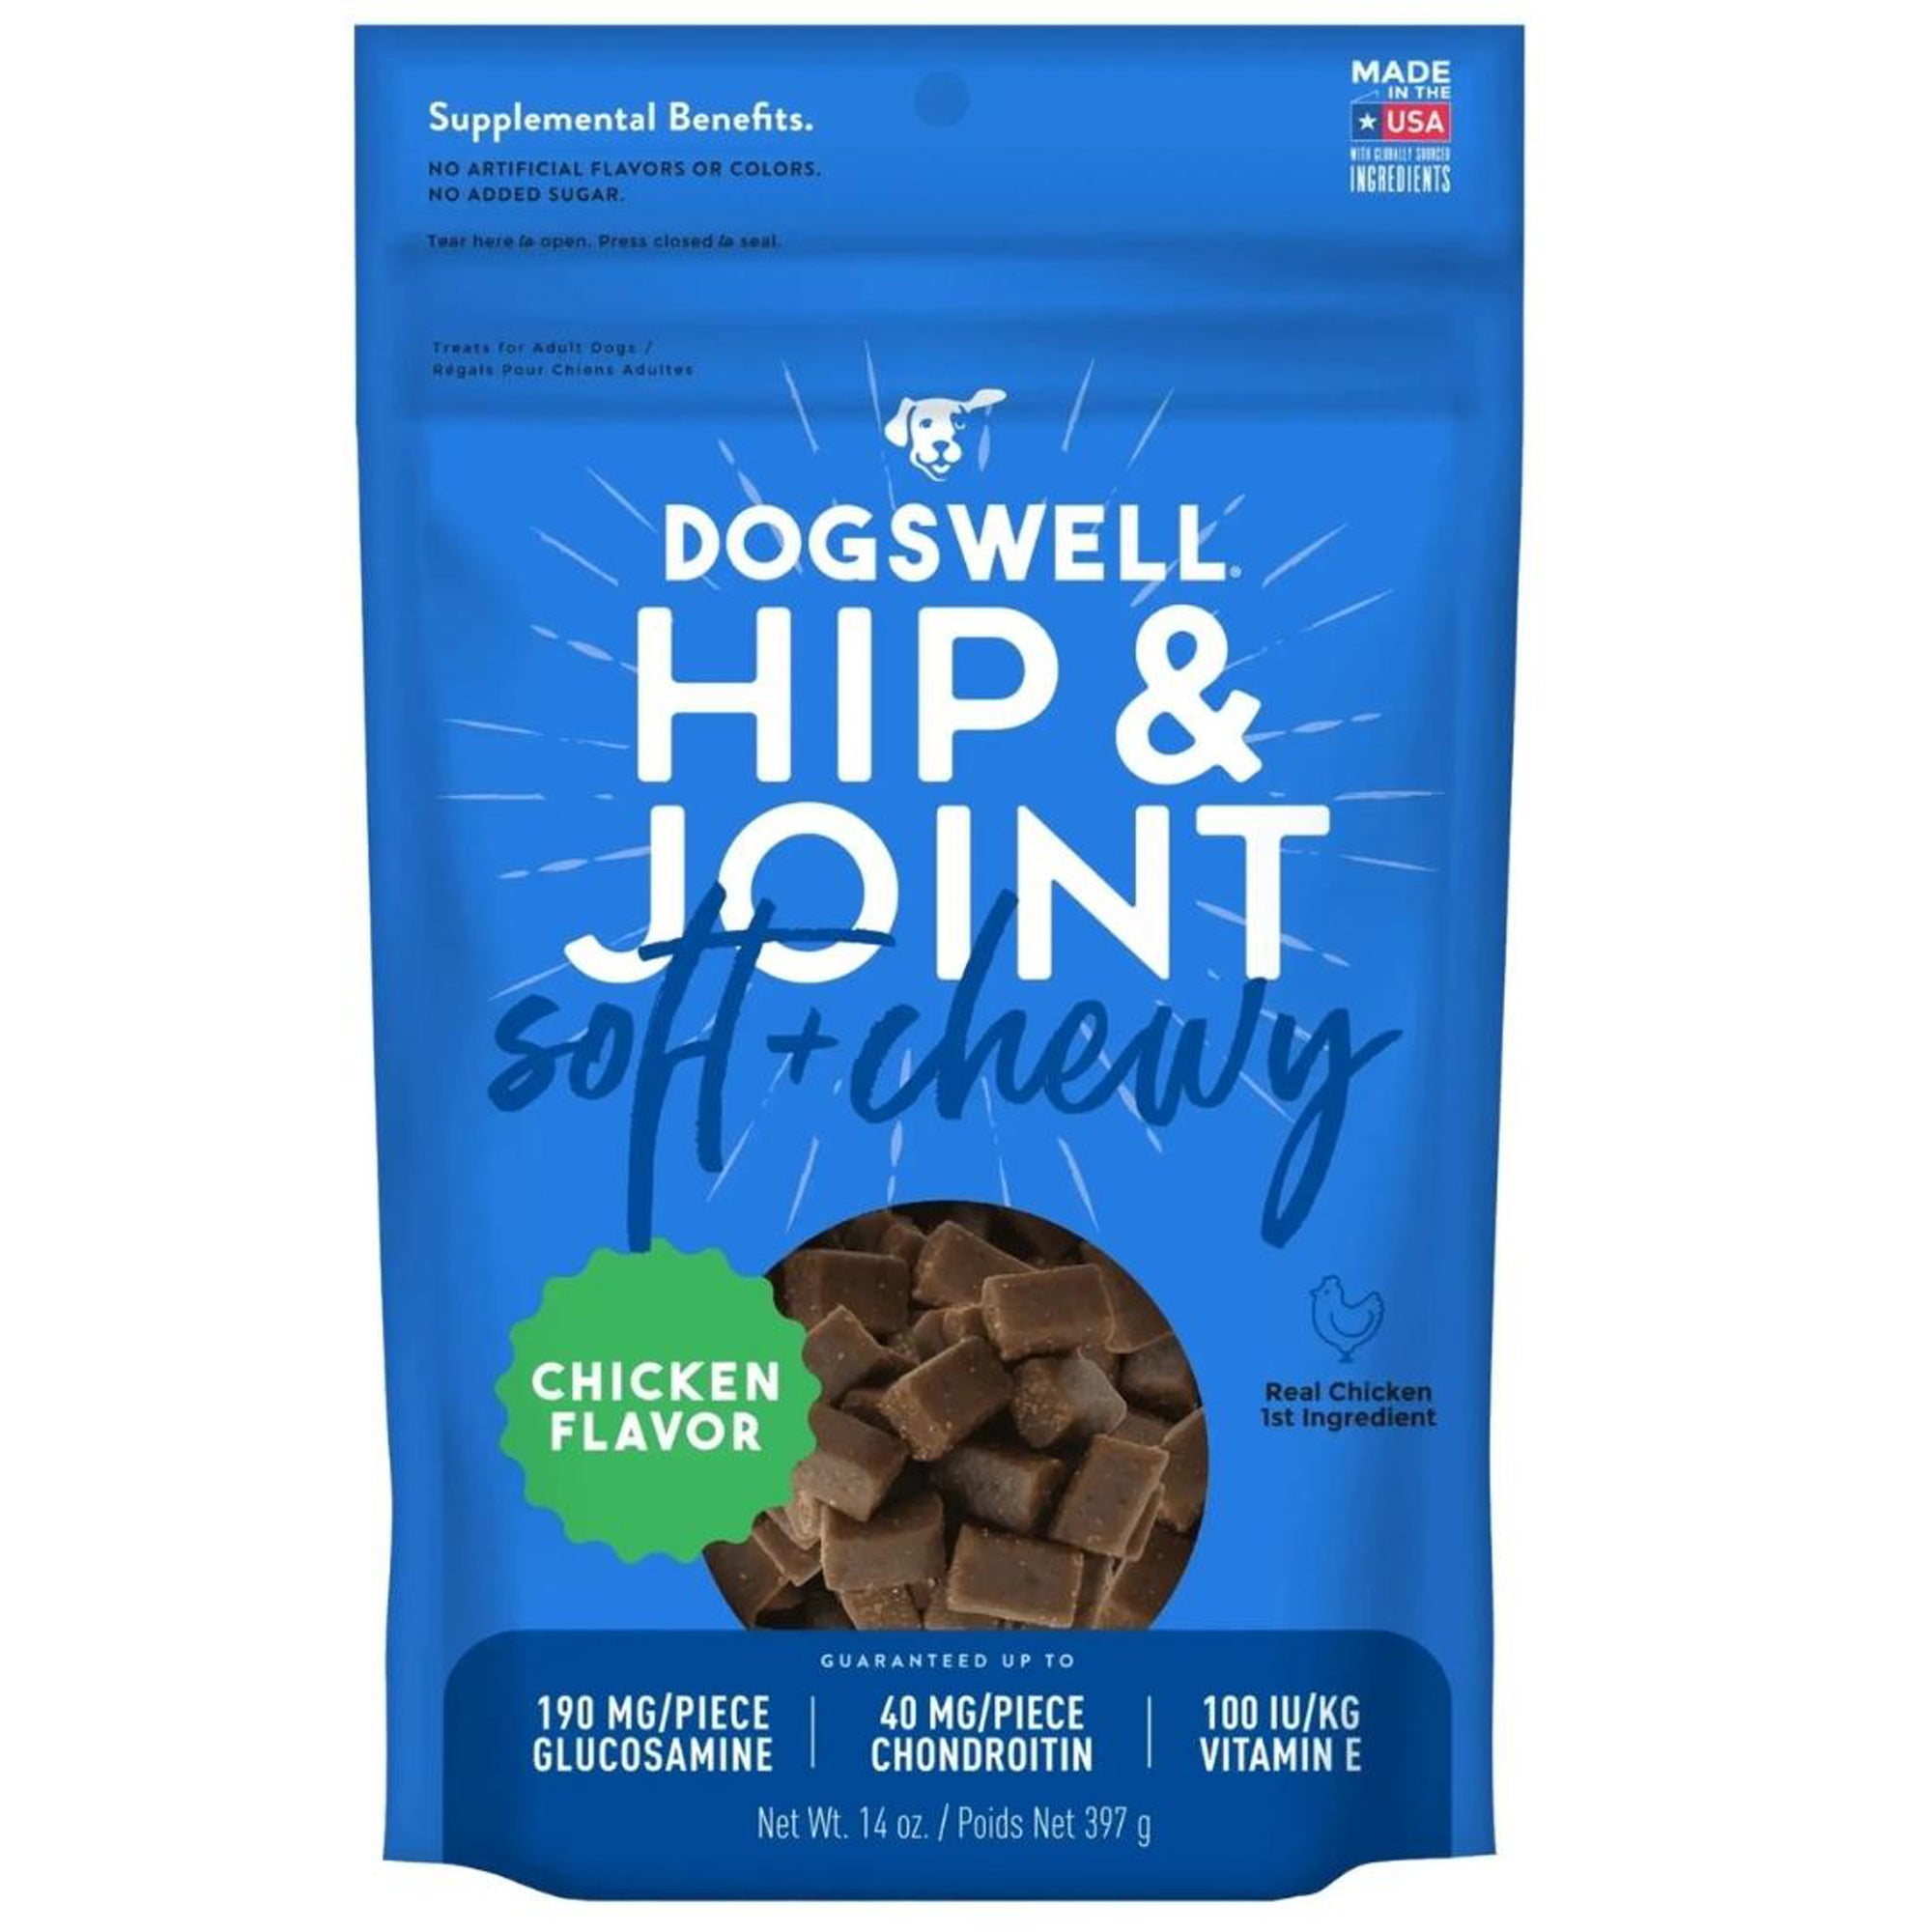 Dogswell Dog Hip & Joint Grain Free Soft & Chewy Chicken 14 oz.